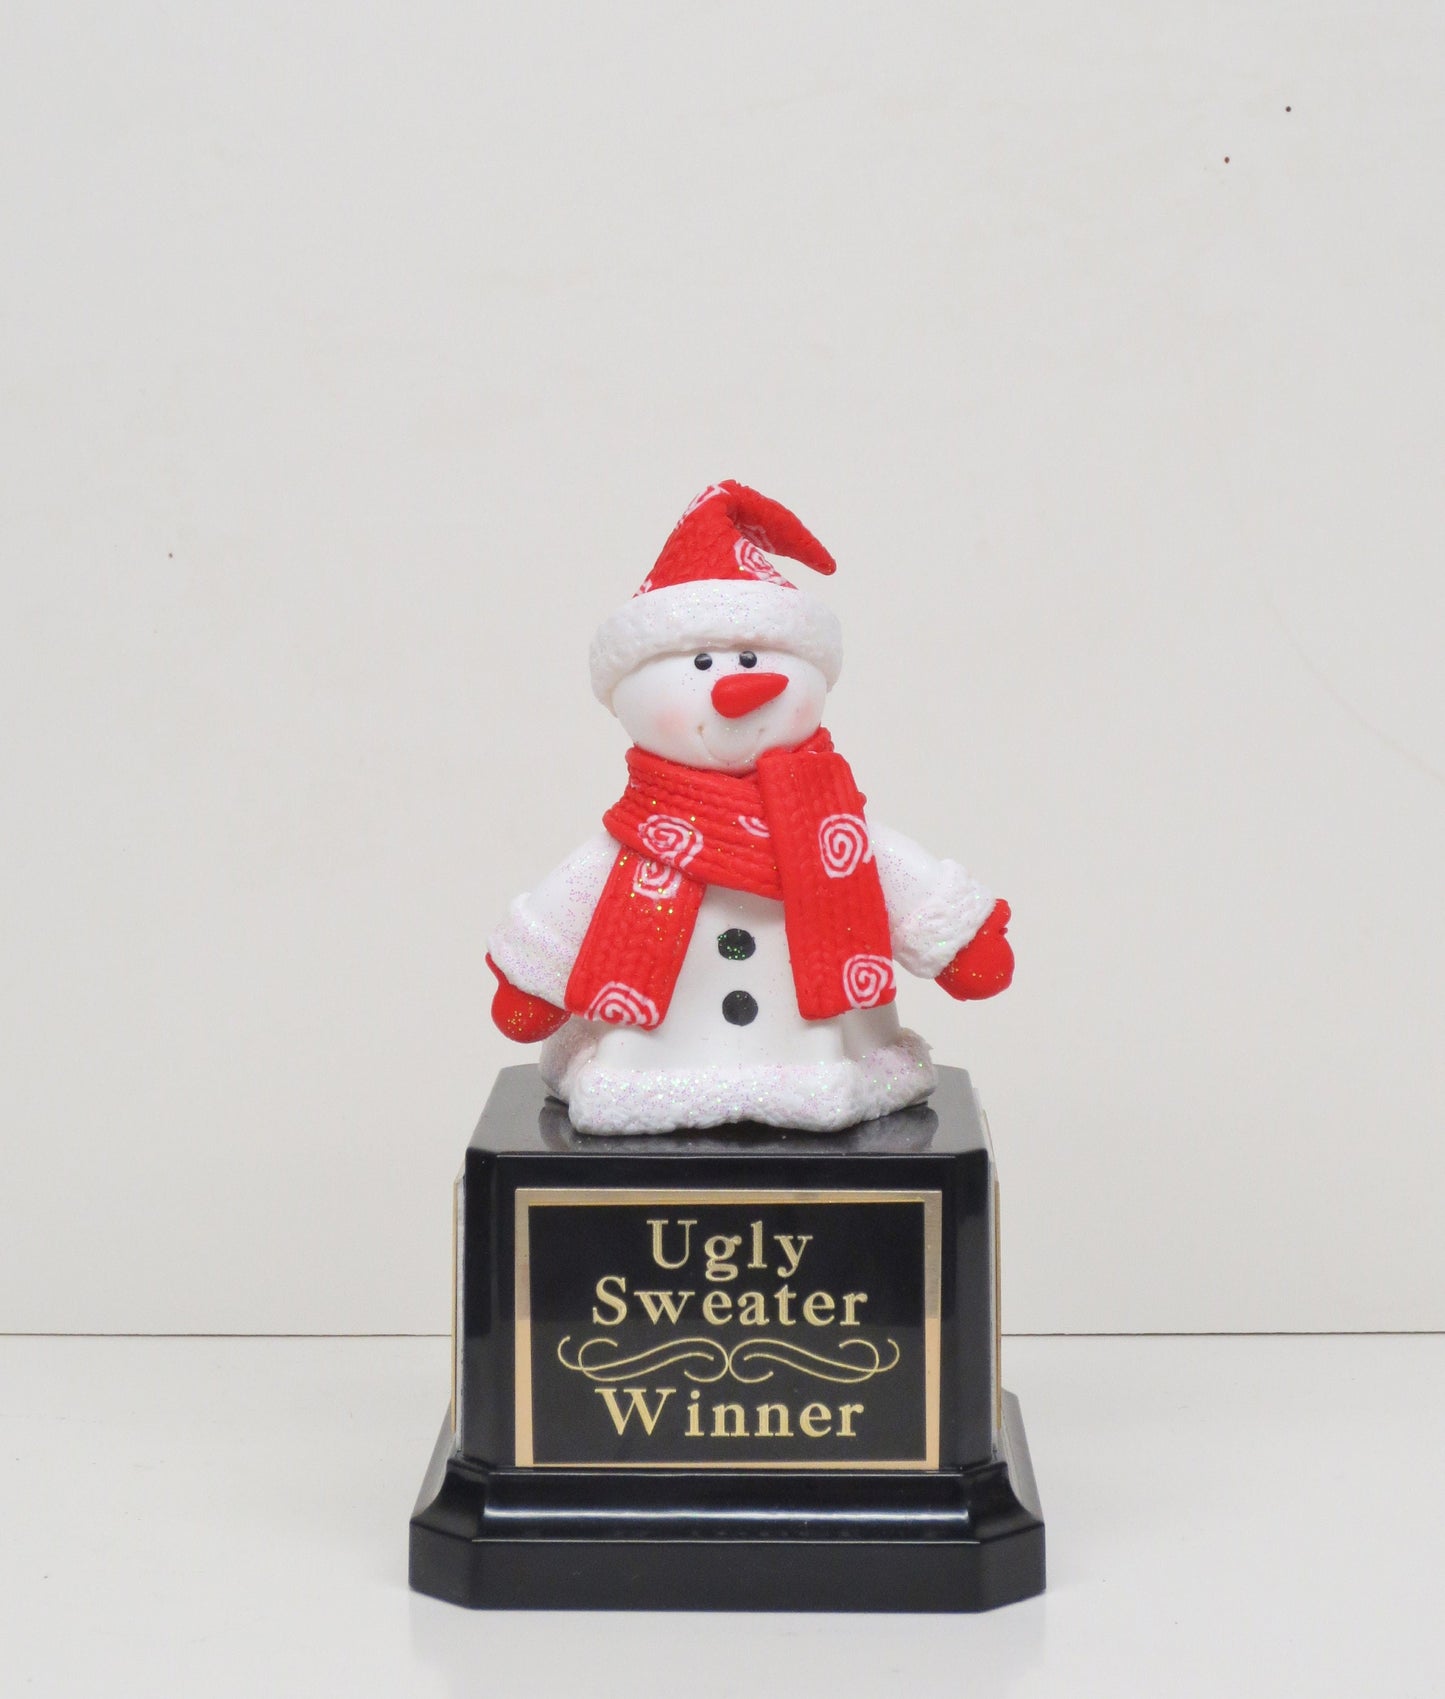 Mini Ugly Ugliest Sweater Trophy Contest Snowman Holiday Party Winner Holiday Christmas Decor Cookie Bake Off Gingerbread House Bake Off